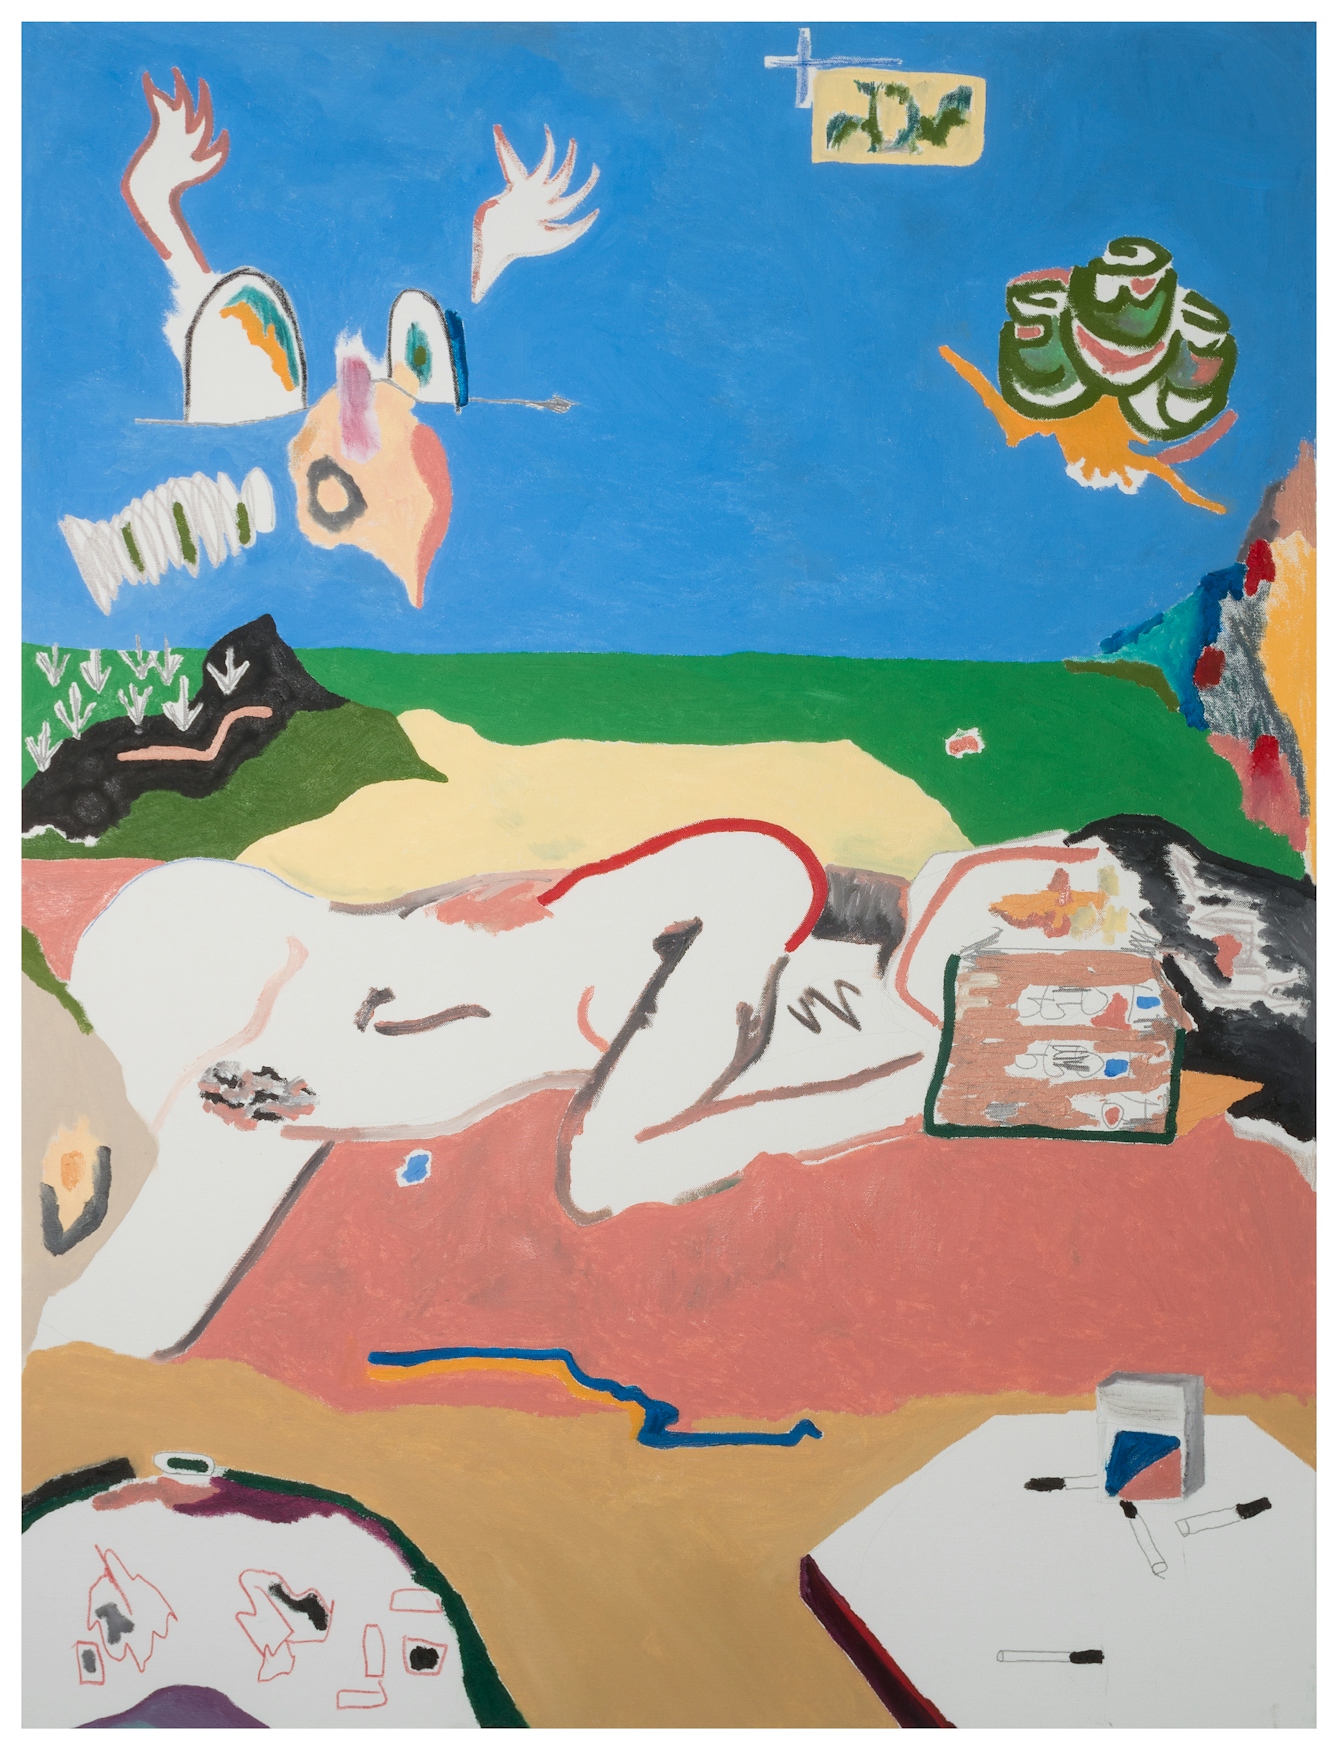 Painted abstract and expressive artwork made up of vibrant colours and graphic forms. The scene shows a horizon line, below which is a green grass-like land and above which is a blue sky. In the sky are several forms including rose buds and a form which could be angel wings but could also be hands reaching out. On the land is a naked figure lying on its side as if in sleep. The face is obscured by a book which has the words "FAGGOT FAGGOT FAGGOT" repeated on the cover. In the foreground are 2 table-like surfaces which have cigarette-like objects strewn about, including what looks like a cigarette packet.